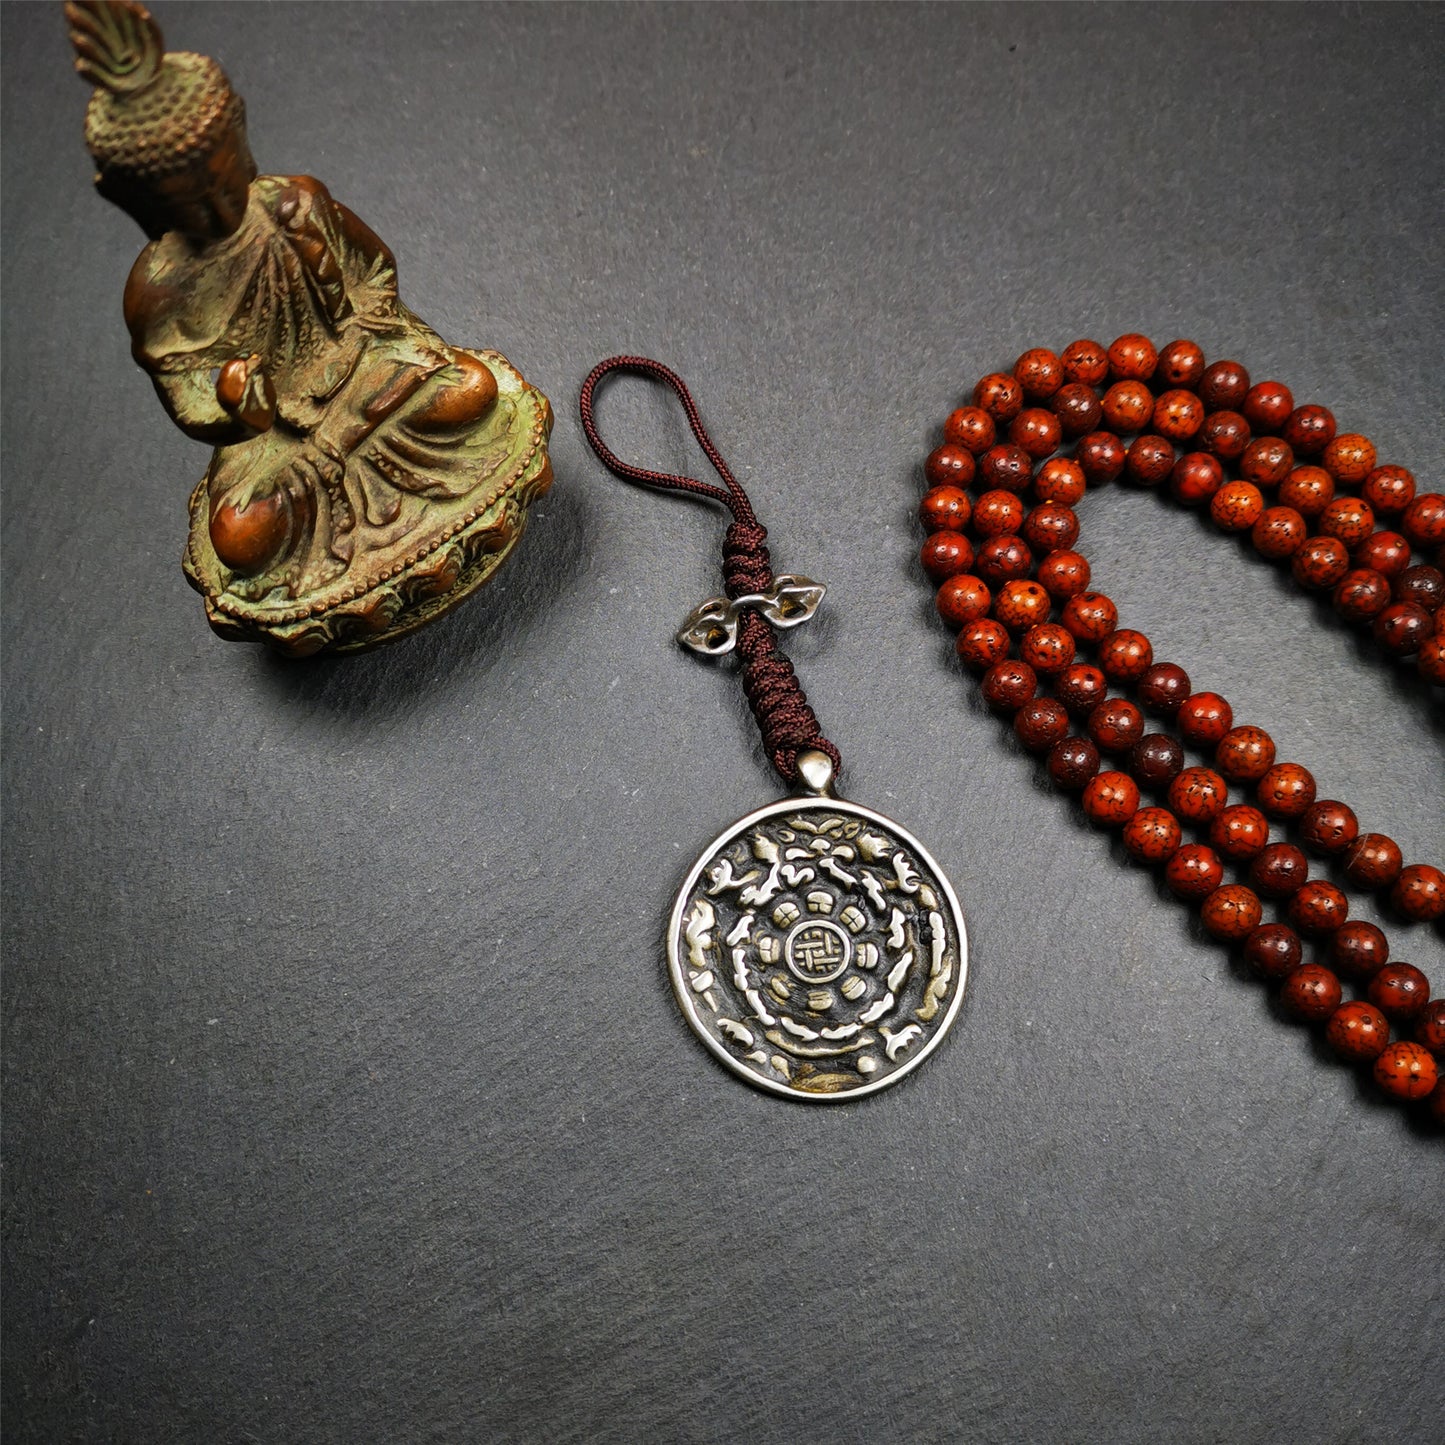 This unique tibetan melong badge was collected from Garzi Monastery for 20 years. It's a Astrology Protective Amulet Pendant,made of cold iron. The pattern is Tibetan Budhist Protective Amulet Pendant - SIPAHO(srid pa ho).  SIPAHO Melong Amulet on the cord,when on a go or travelling, it's placed as a waist badge. You can make it into pendant,keychain, bag hanging,or just put it on your desk,as an ornament. The wearing of Srid-Pa-Ho heightens awareness, and protects body and mind from negative influences.